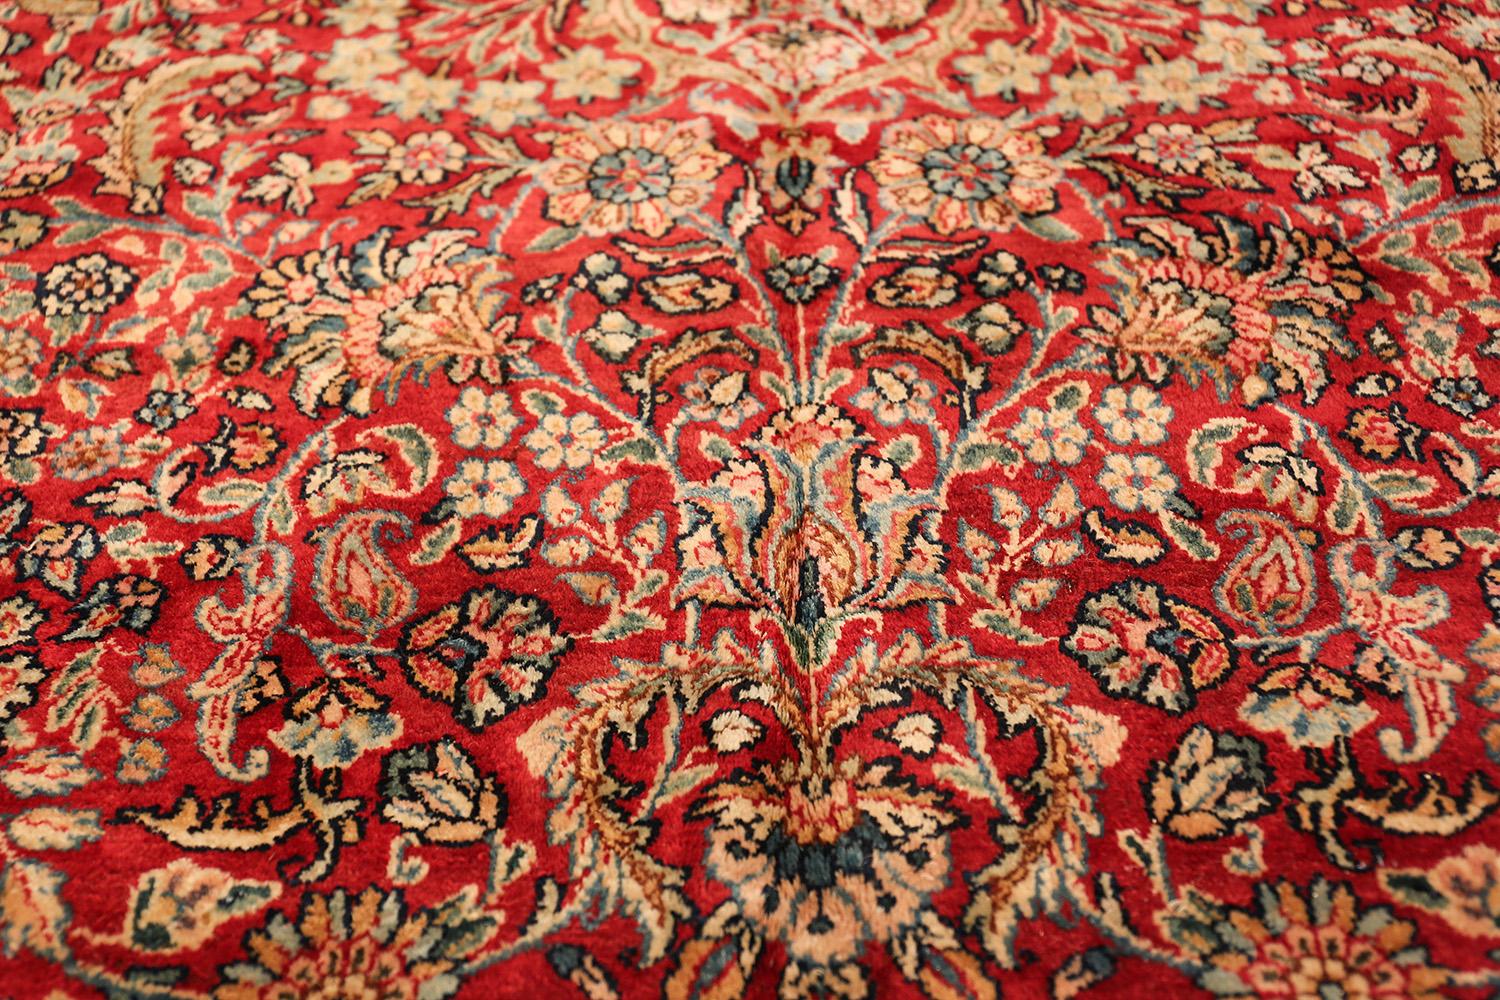 19th Century Antique Kerman Persian Rug. Size: 9 ft 9 in x 17 ft 3 in (2.97 m x 5.26 m)